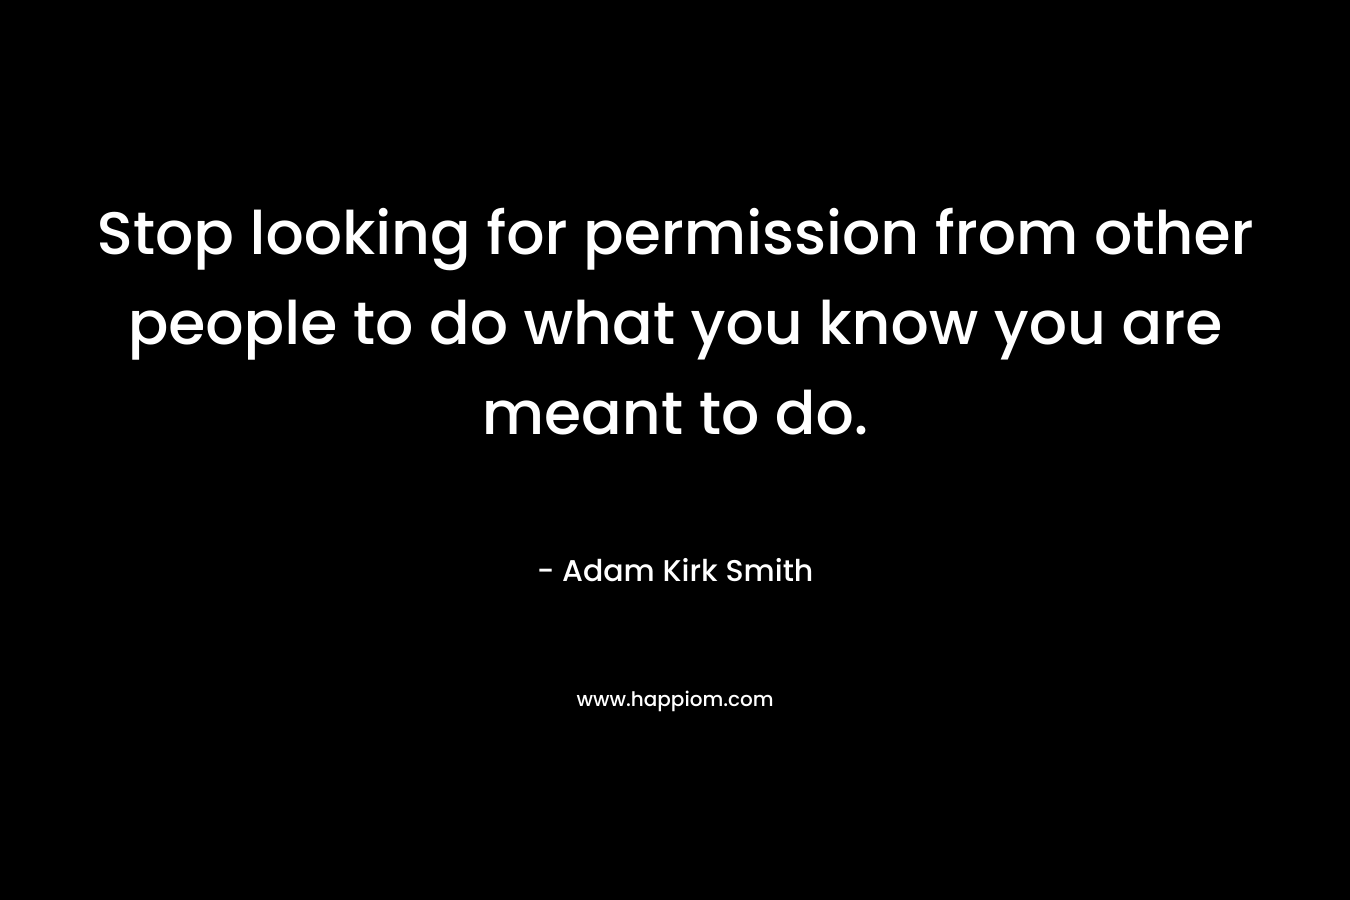 Stop looking for permission from other people to do what you know you are meant to do.